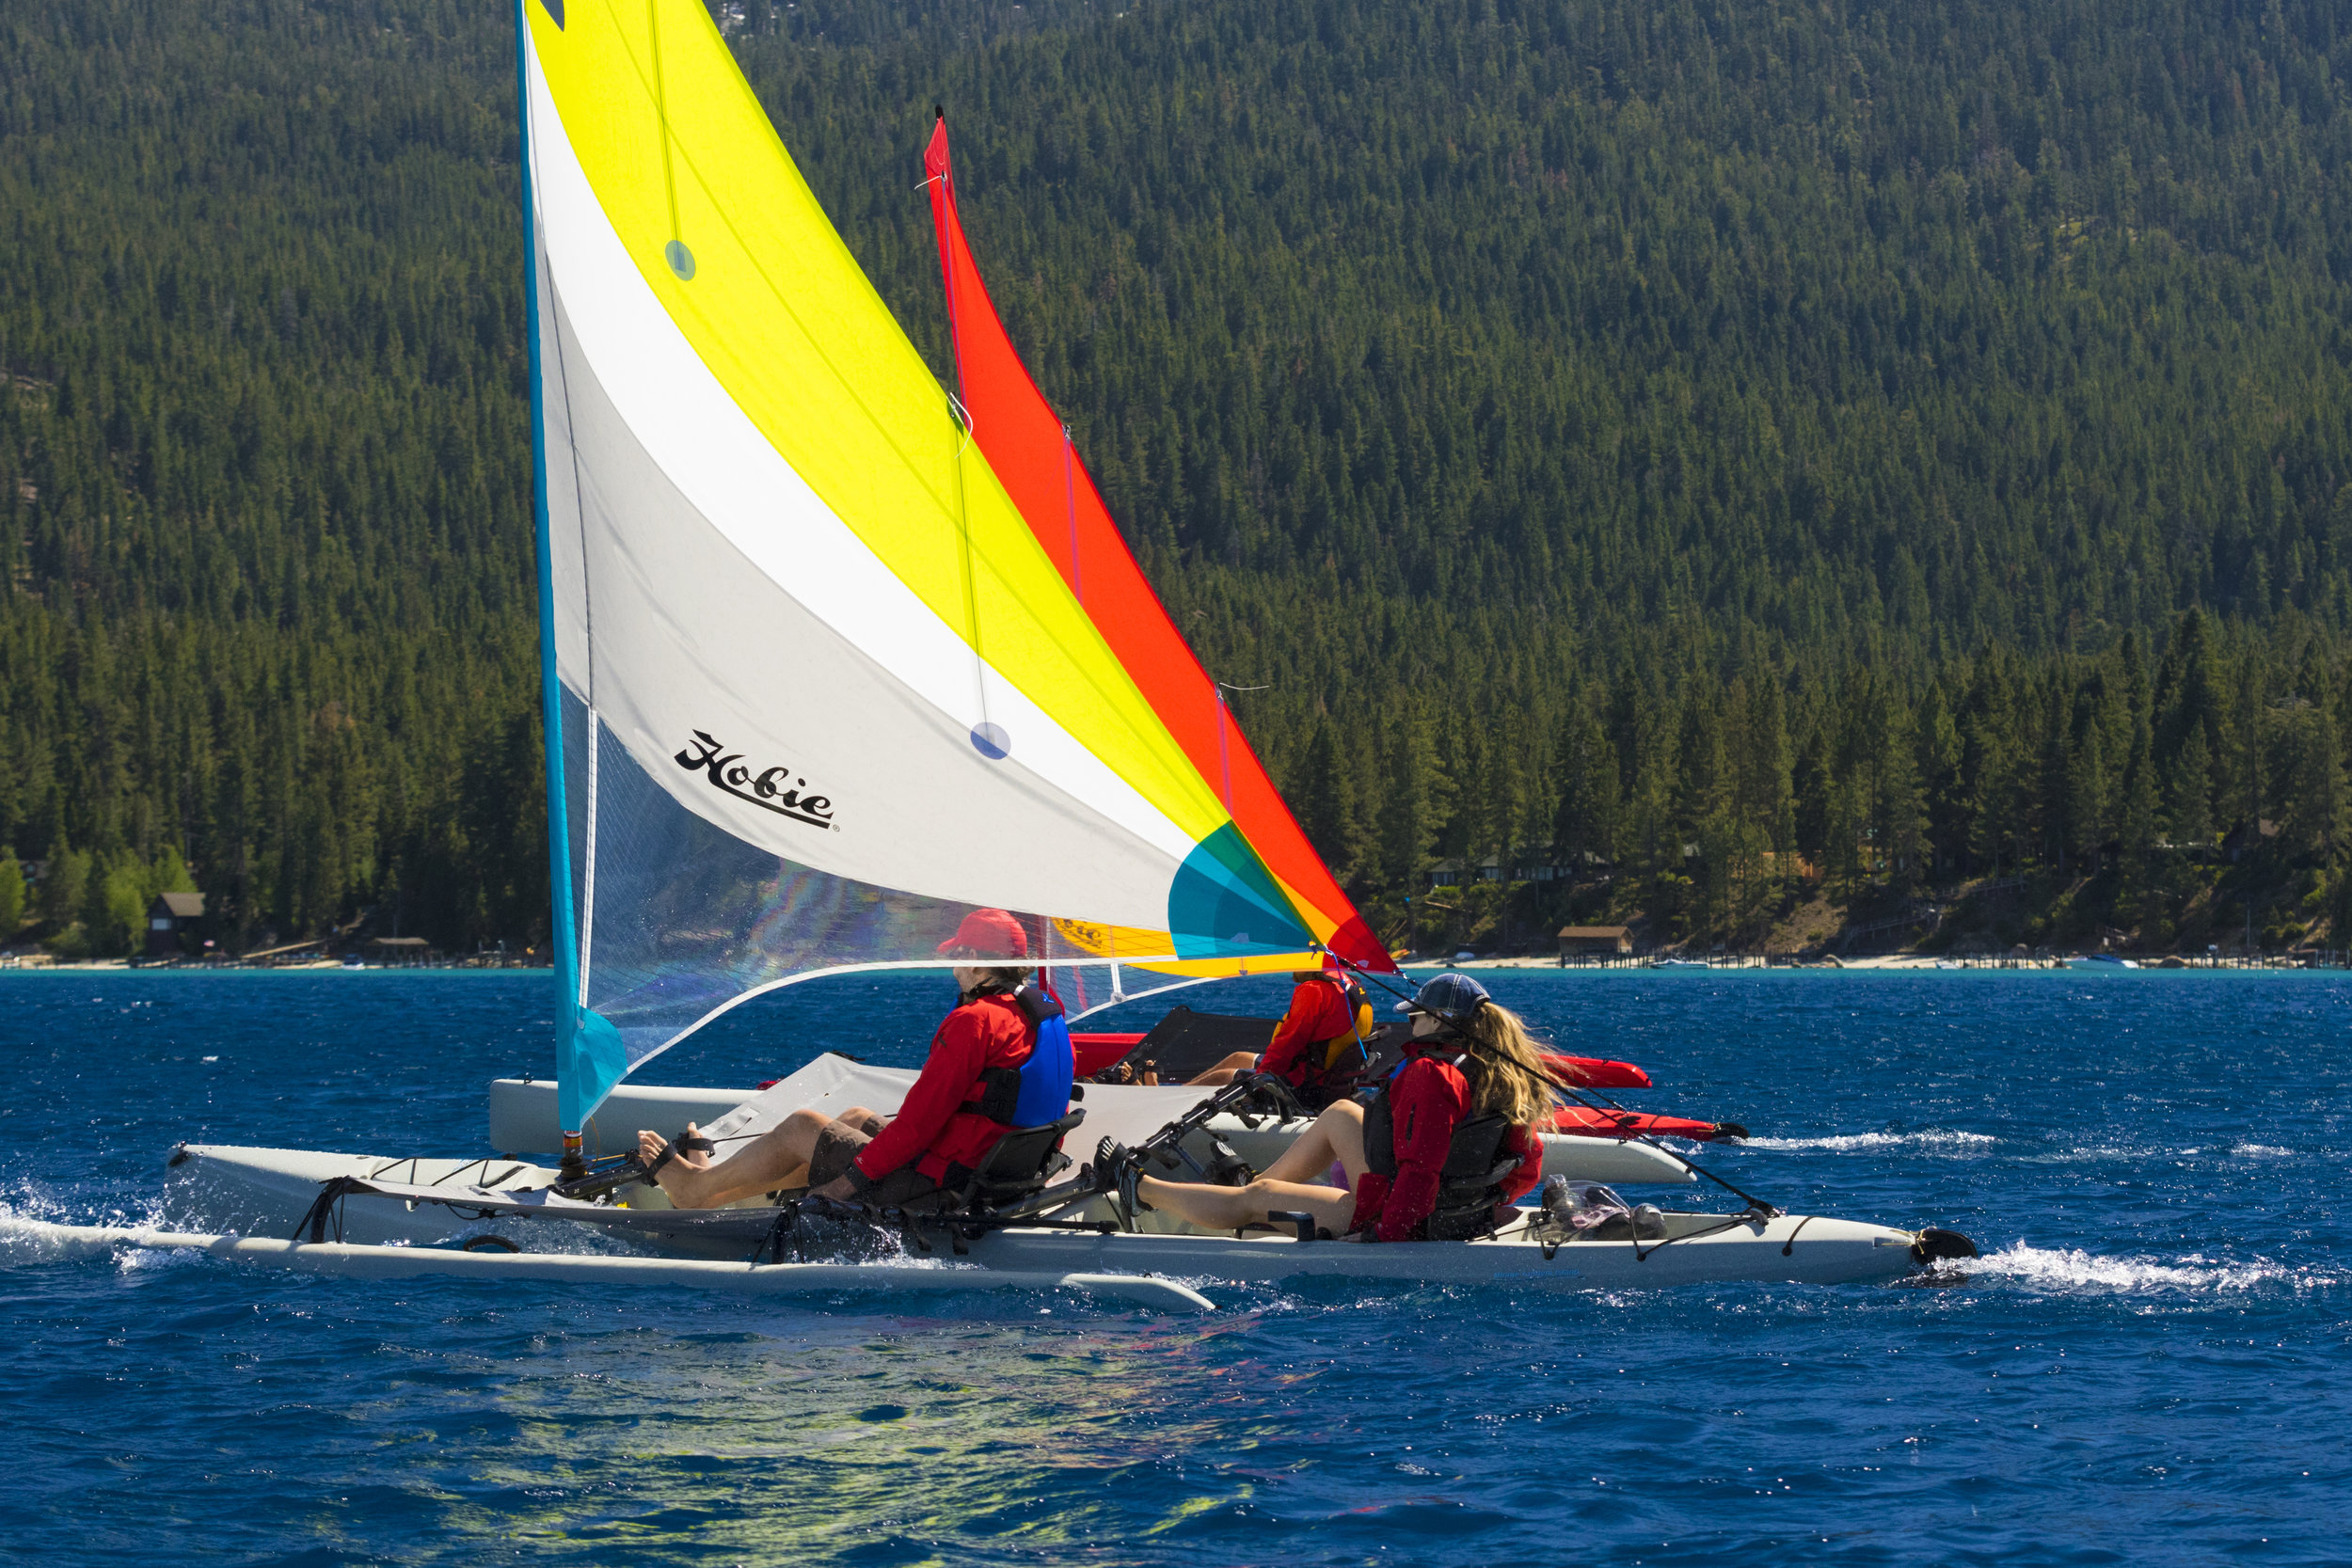 Islands_action_Tahoe_red_dune_pedalSailing_2408_full.jpg